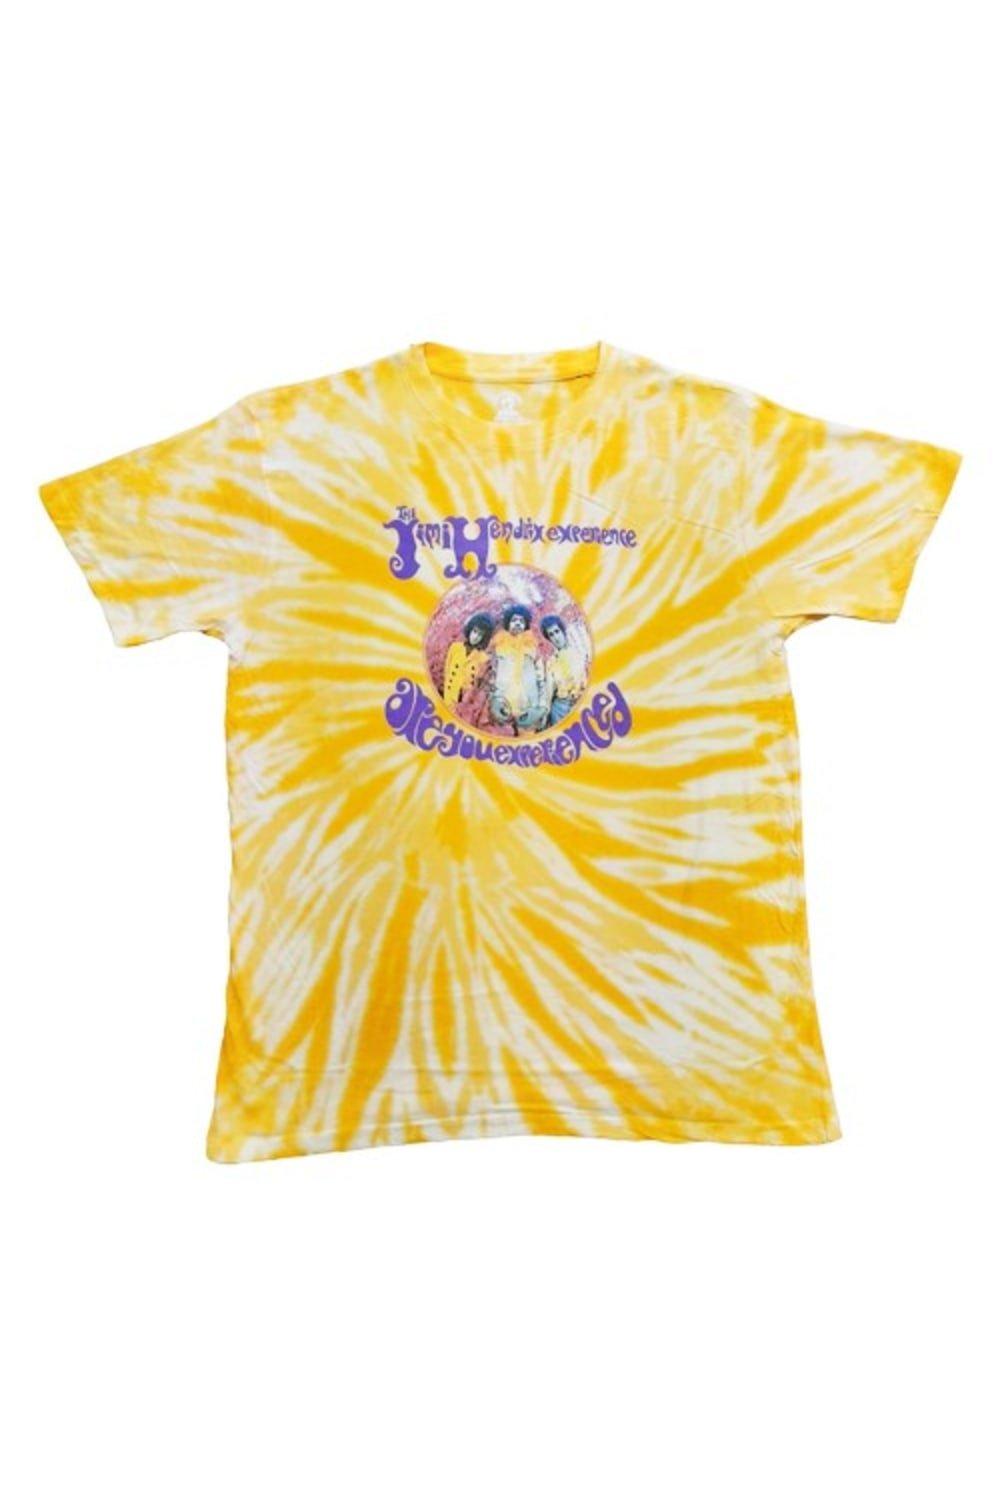 Are You Experienced Tie Dye T-Shirt